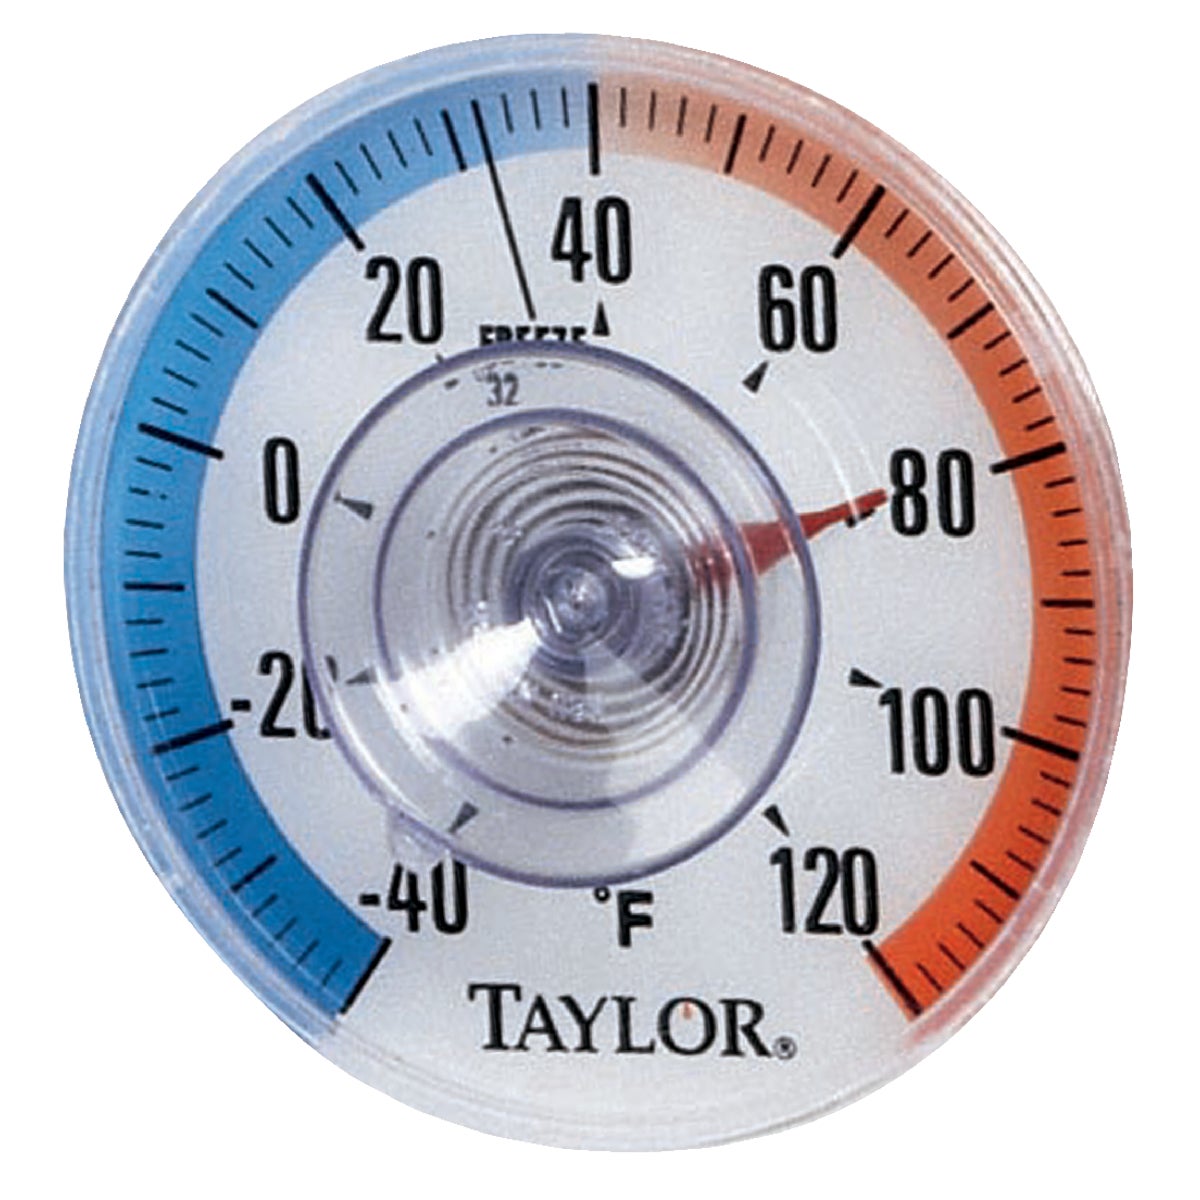 Item 626015, 3-1/2" window dial. Read outside temperature from inside.